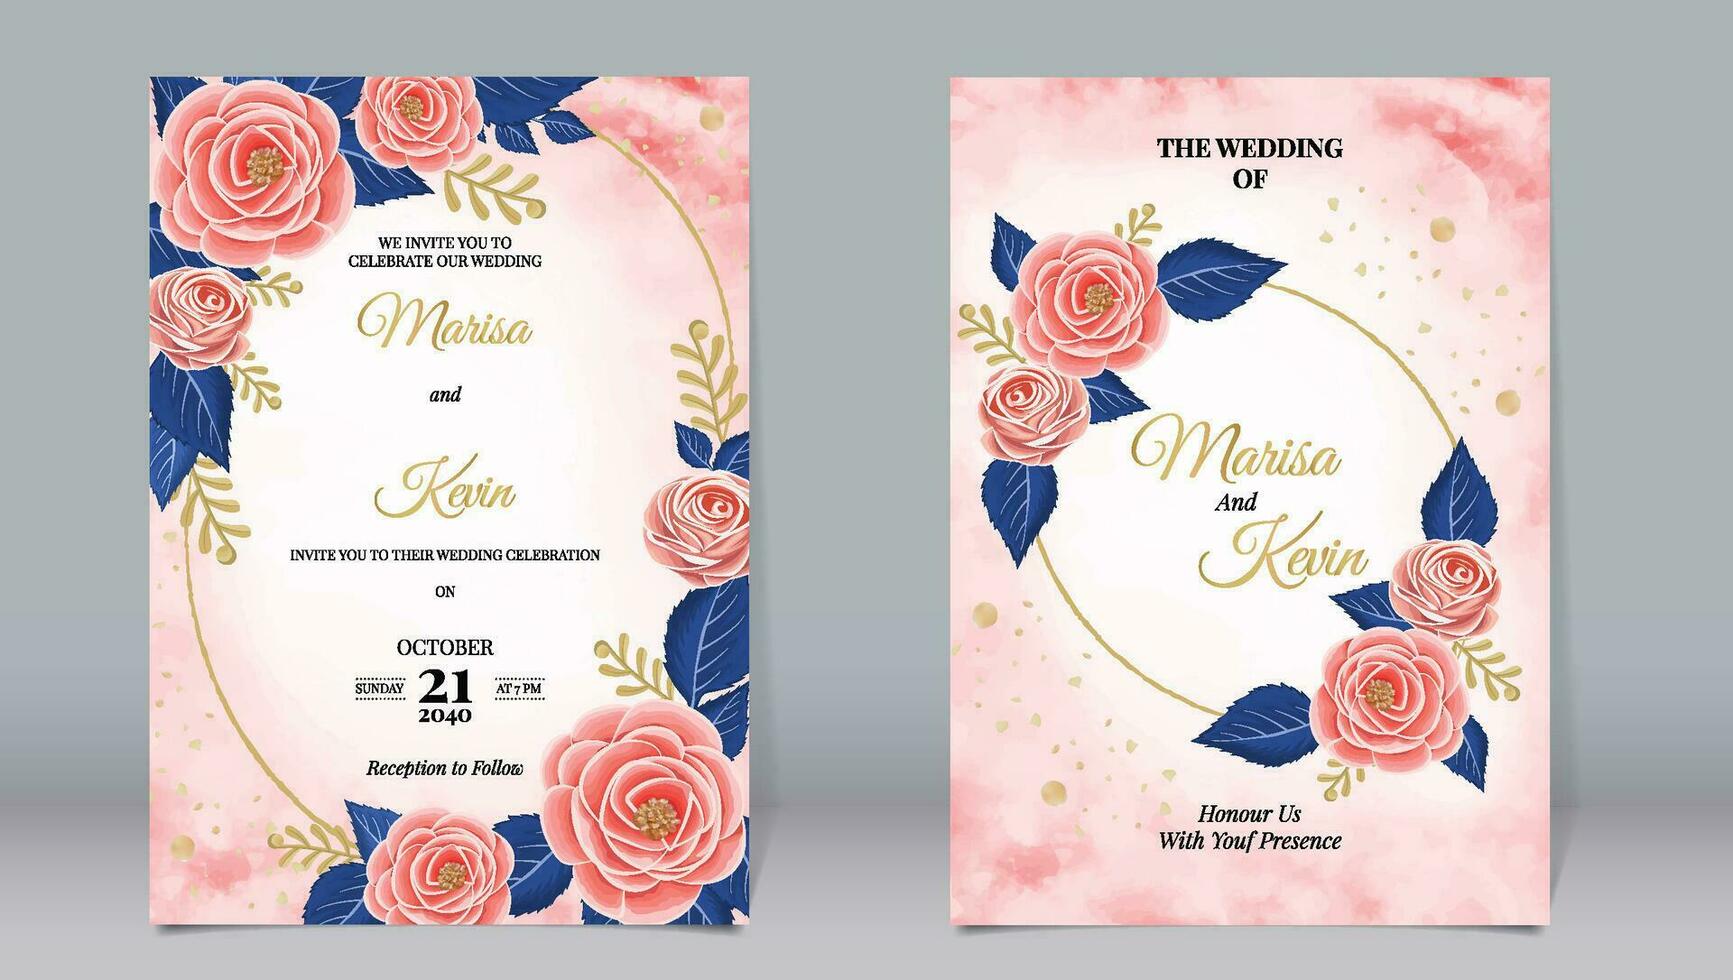 Wedding invitation of pink roses and blue leaves on a watercolor background vector